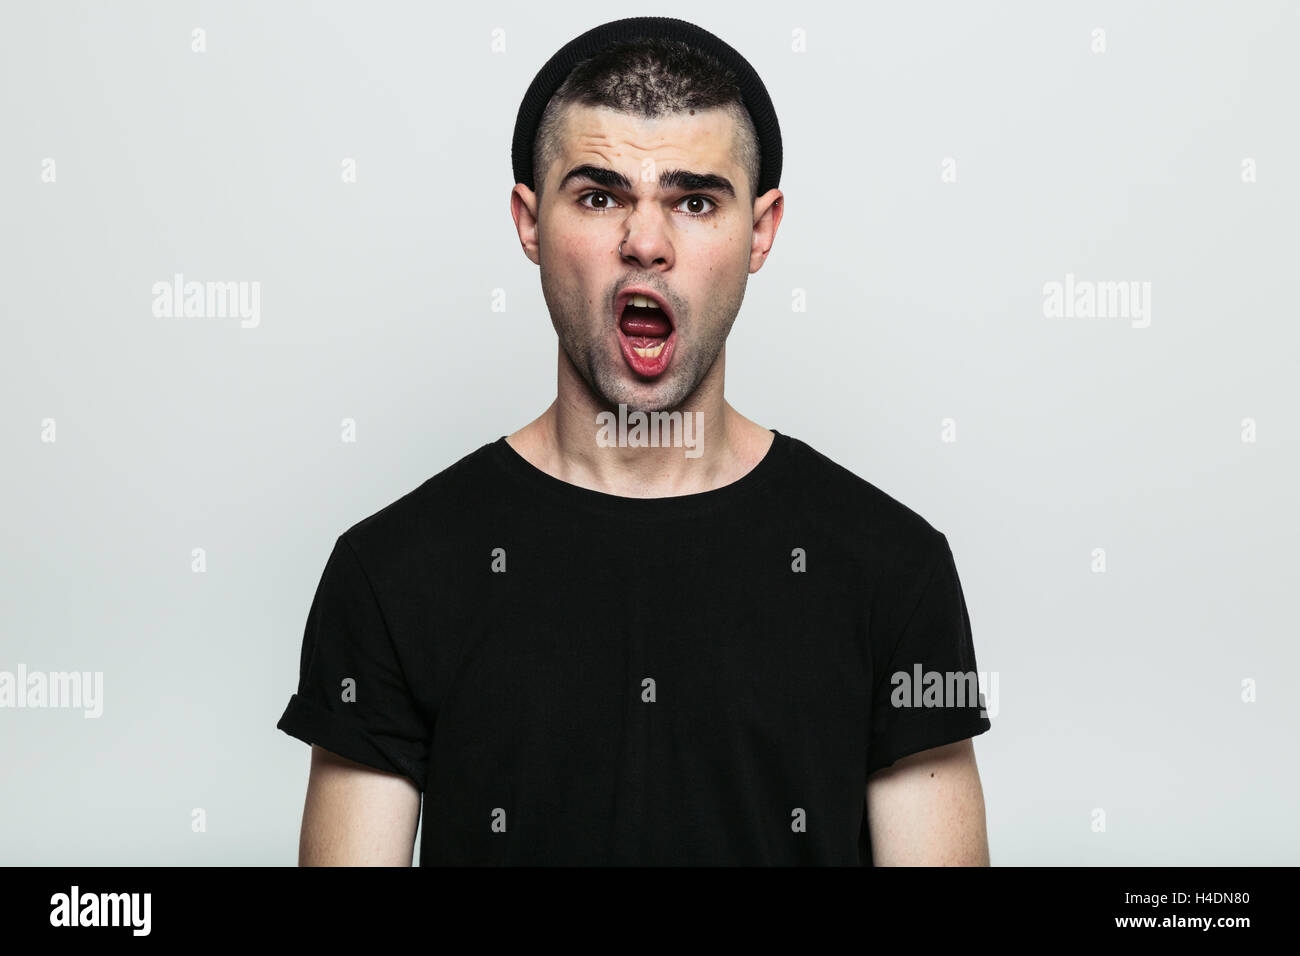 Man with an open mouth looking at camera Stock Photo